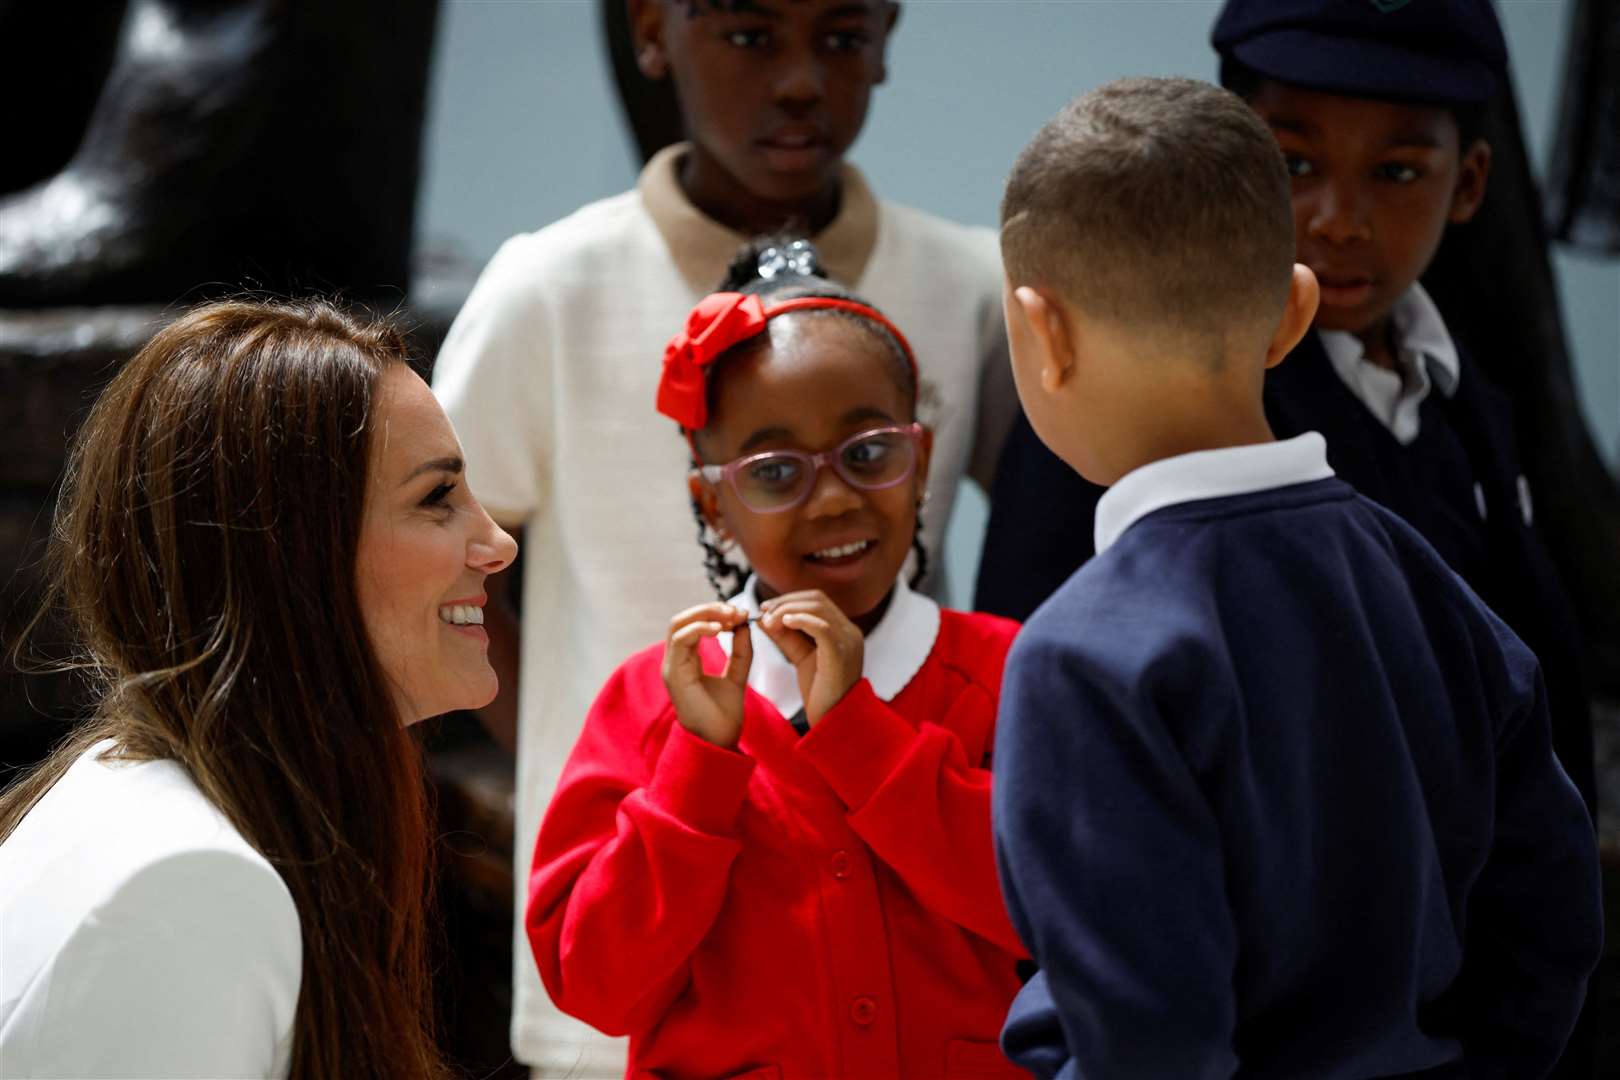 The Duchess of Cambridge speaks with children at the unveiling (John Sibley/PA)